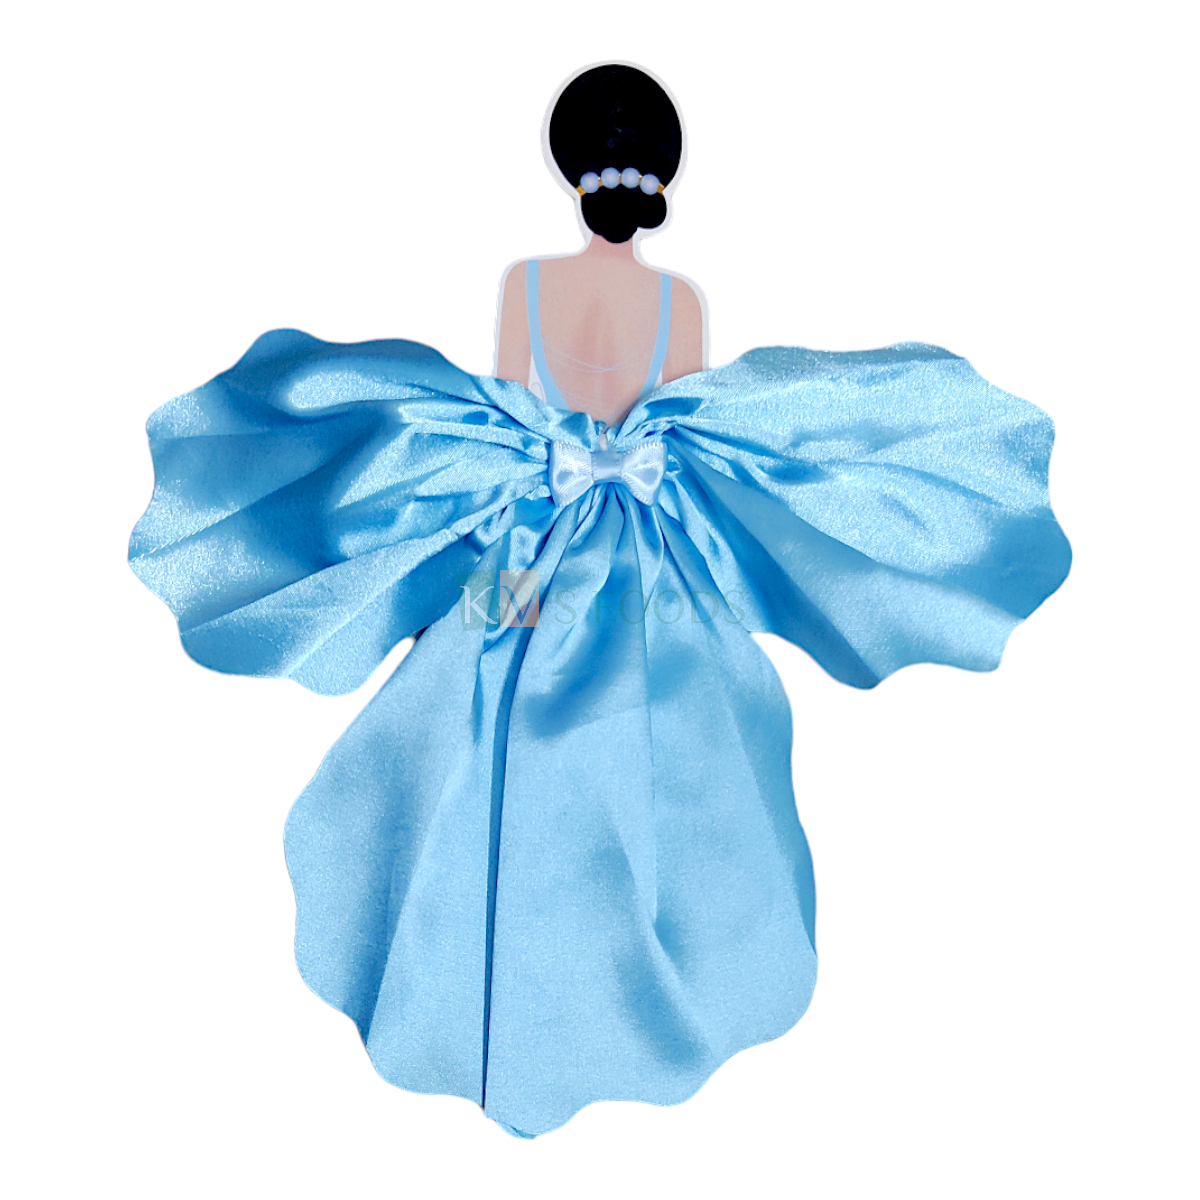 1PC Girl Lady Women Back with Blue Silk Chiffon Gauze Skirt Non-Woven Fabric Cake Topper for Bride Wedding, Mother's Day, Women's Day Theme, Cake Topper Insert Cake Decoration Accessories